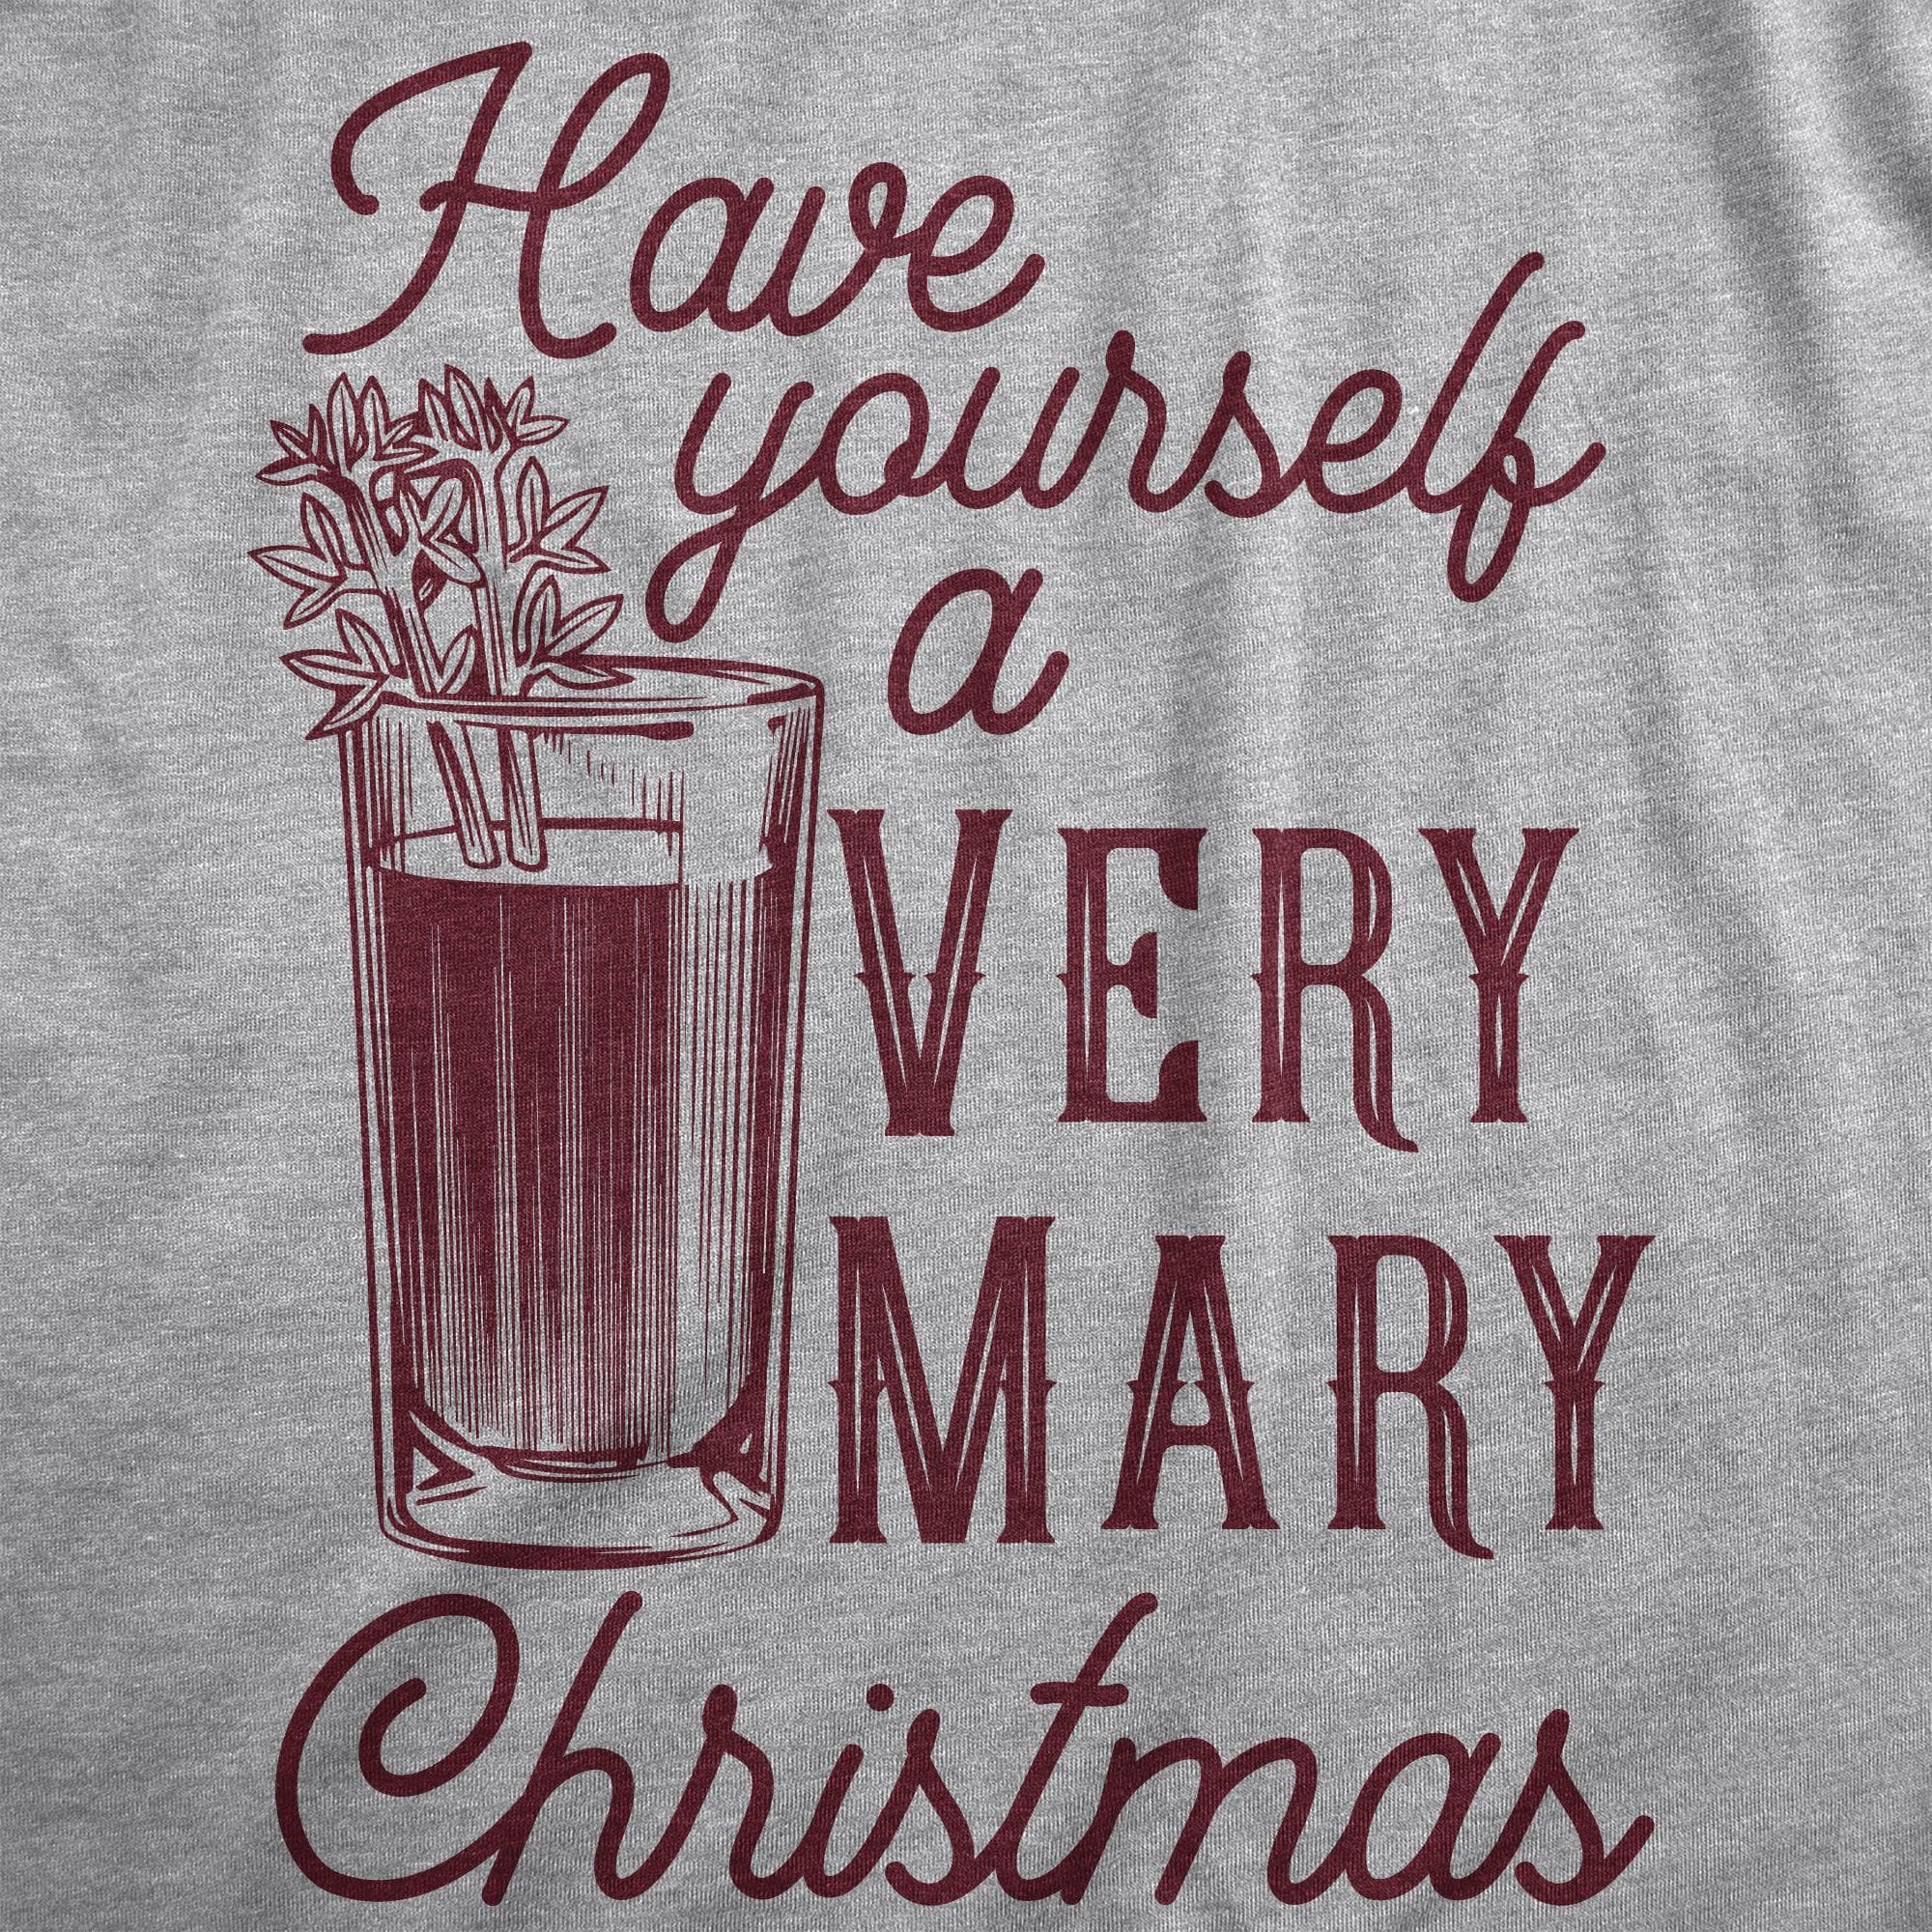 Have Yourself A Very Mary Christmas Women's Tshirt  -  Crazy Dog T-Shirts